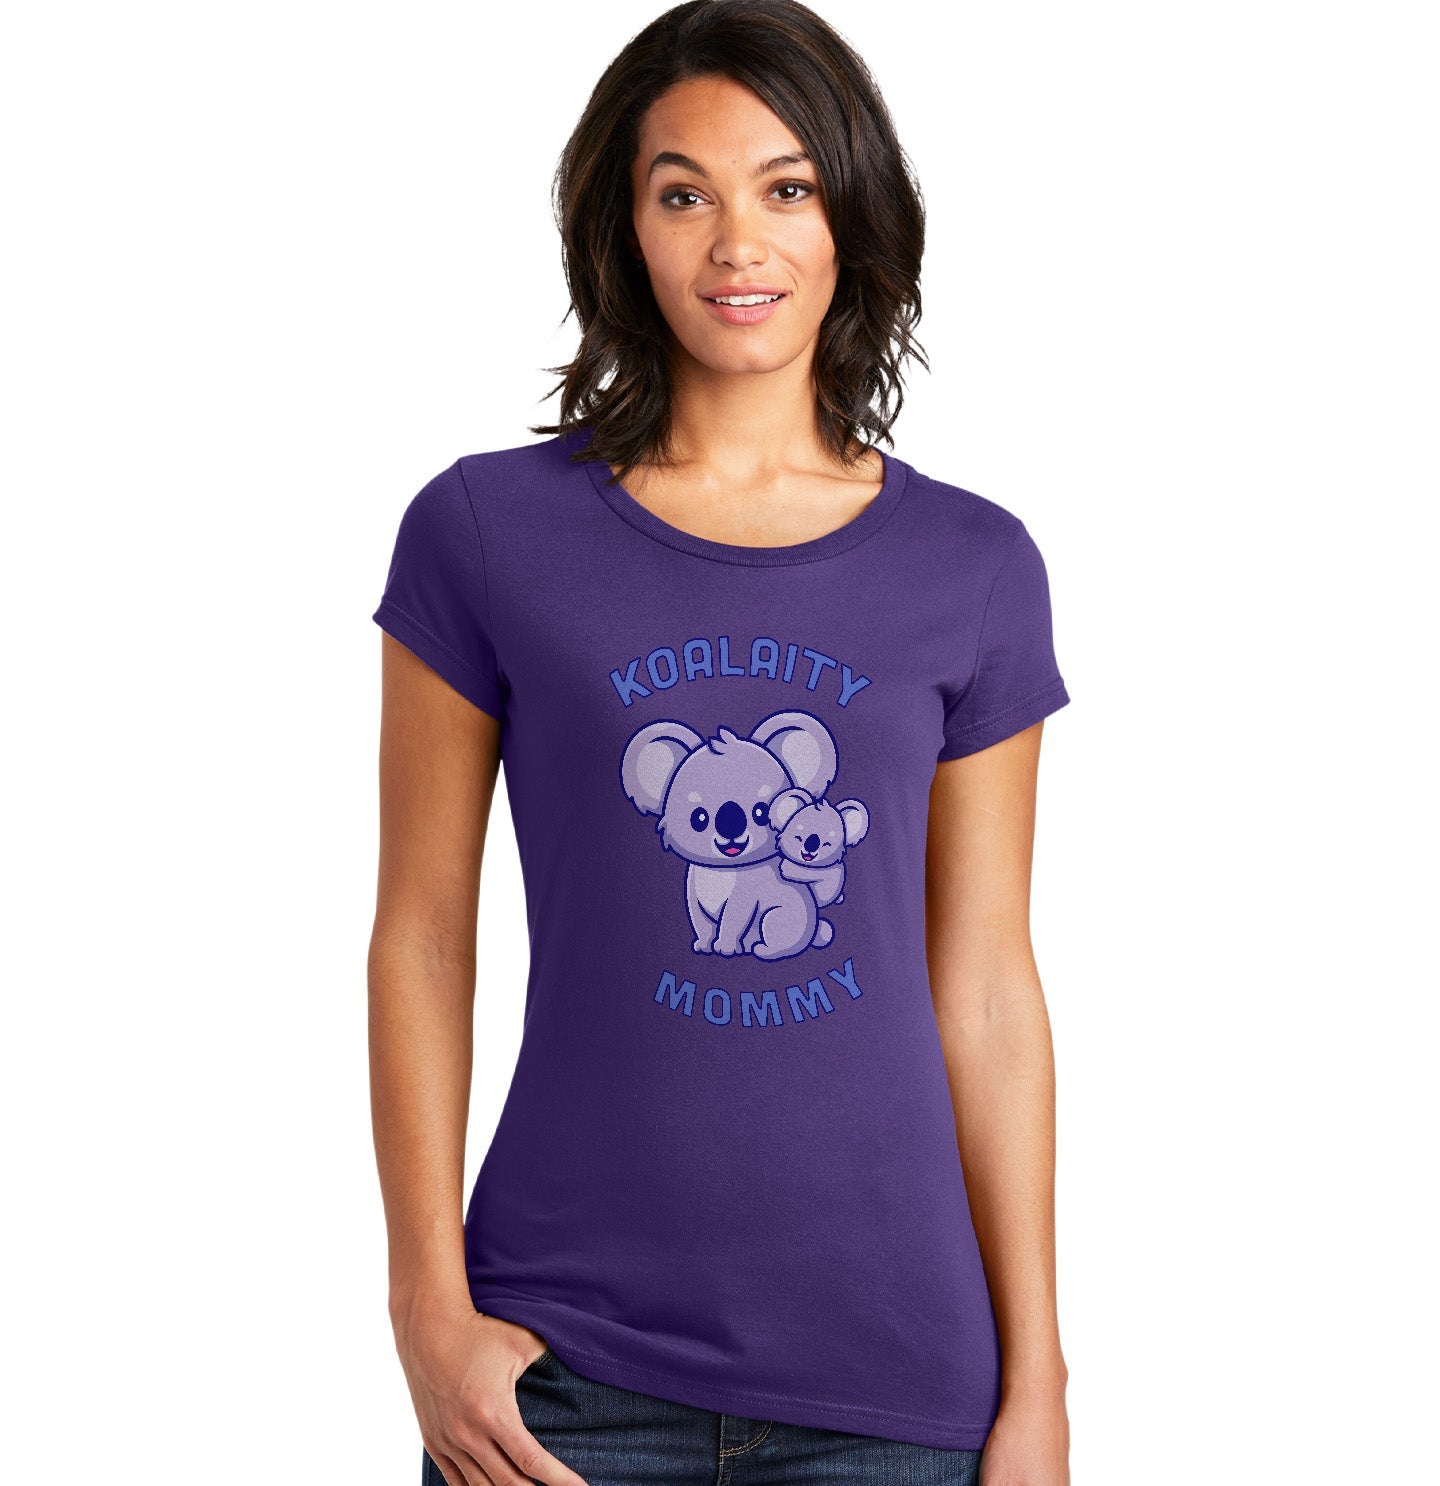 Koalaity Mommy - Women's Fitted T-Shirt